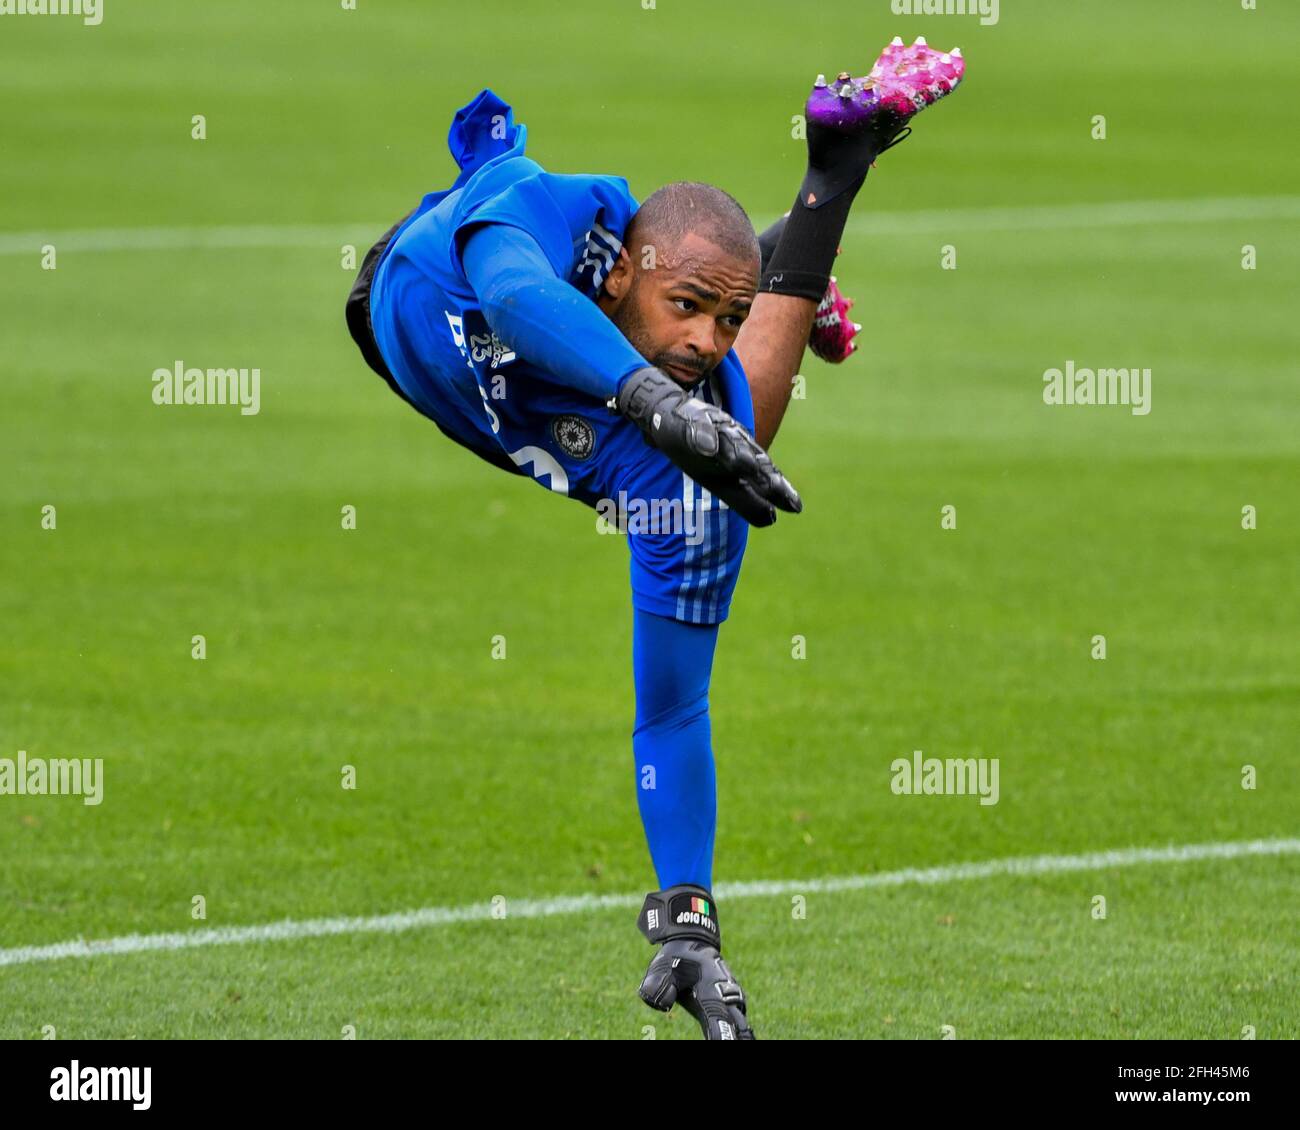 Nashville, TN, USA. 24th Apr, 2021. Montreal goalkeeper, Clement Diop (23), makes a diving save during warm up before the MLS match between CF Montreal and Nashville SC at Nissan Stadium in Nashville, TN. Kevin Langley/CSM/Alamy Live News Stock Photo